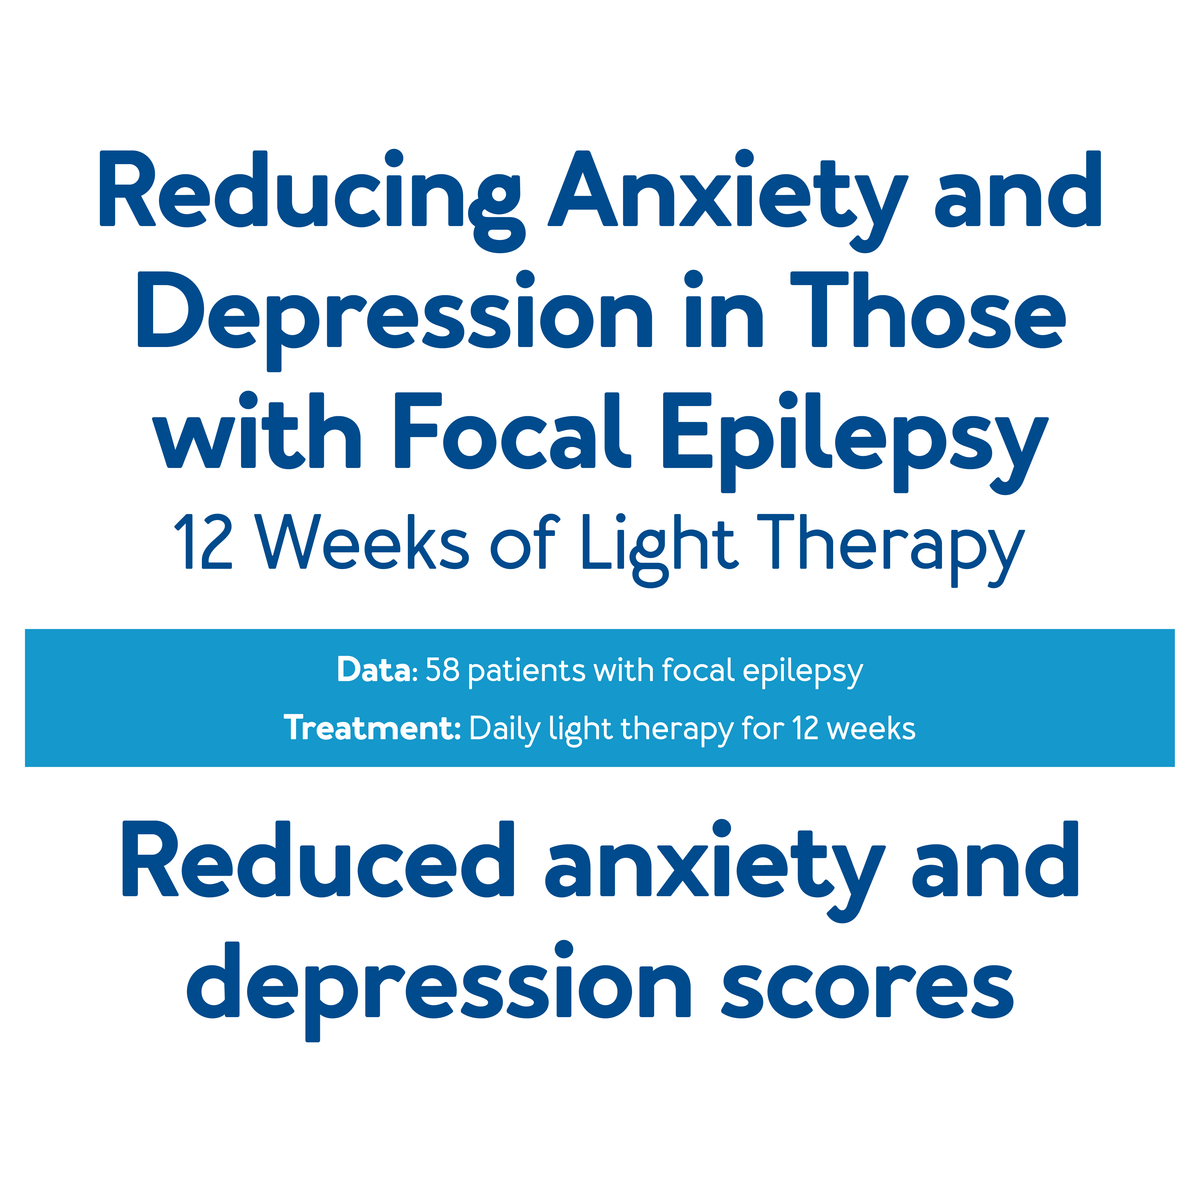 Reducing Anxiety and Depression in Those with Focal Epilepsy, further details are provided below.